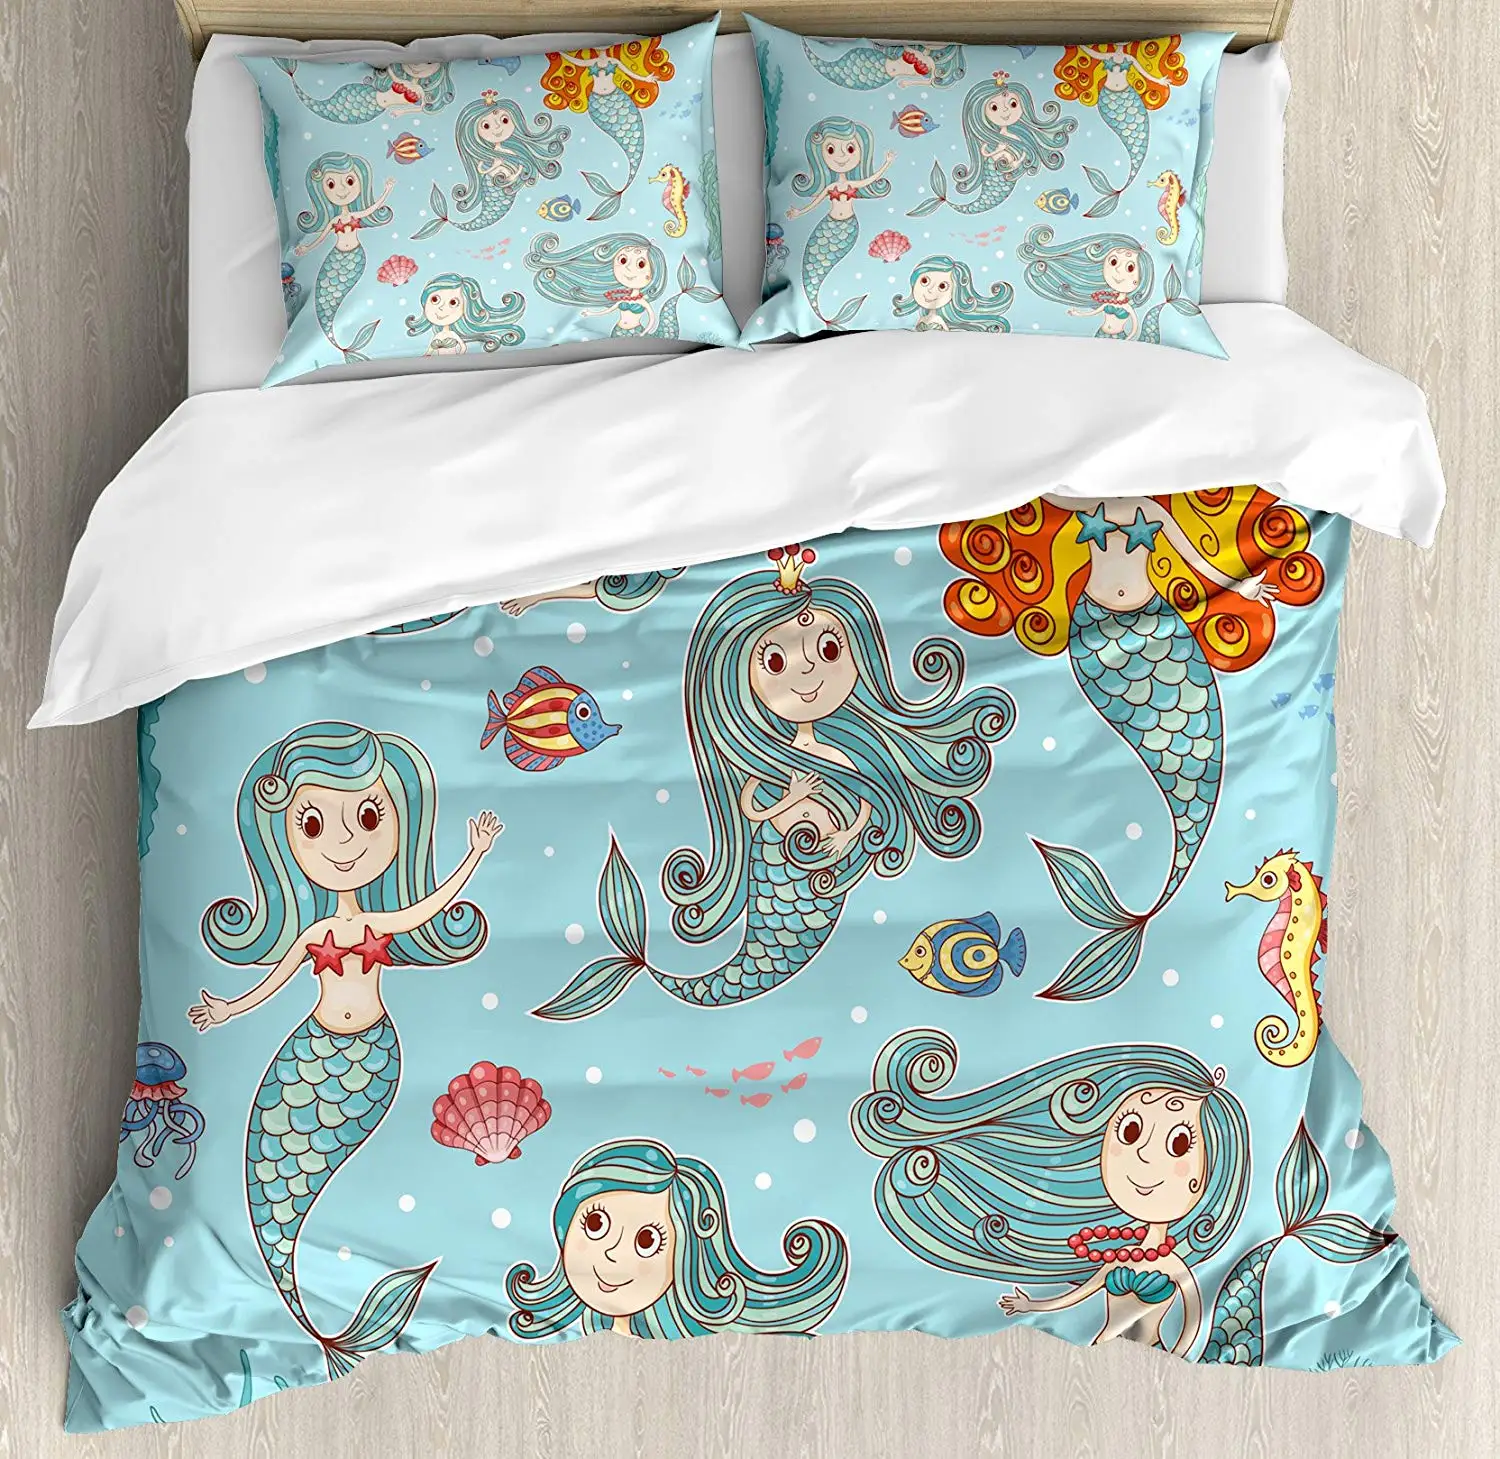 Mermaid Duvet Cover Set Composition Of Mermaids With Different